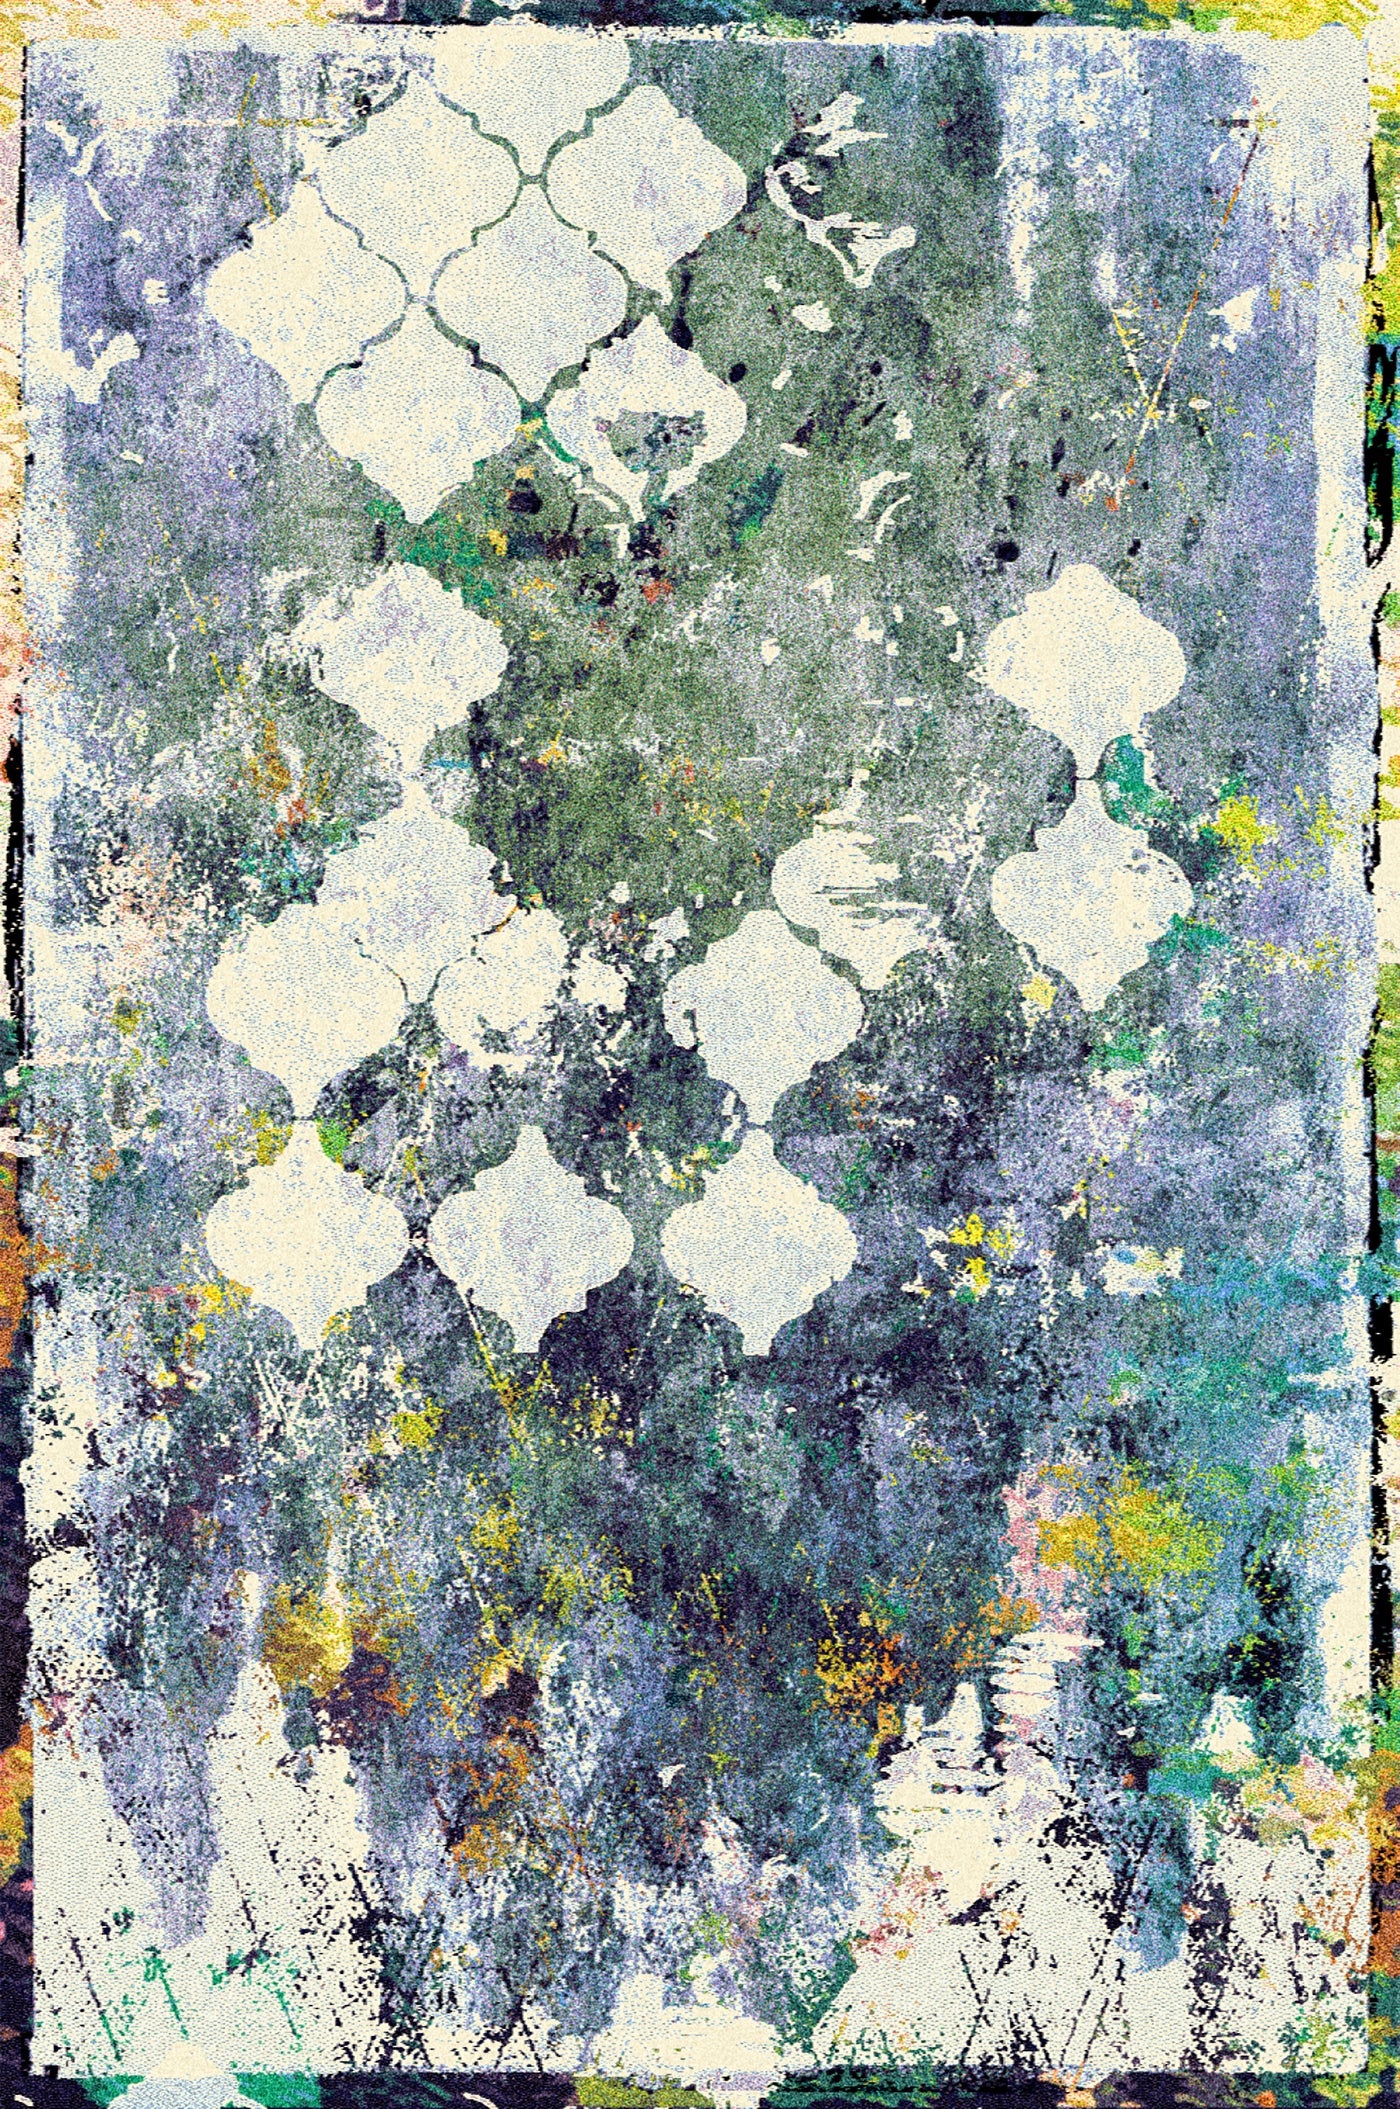 A carpet featuring an abstract design with a faded geometric pattern in white, set against a textured background with shades of green, blue, purple, and yellow